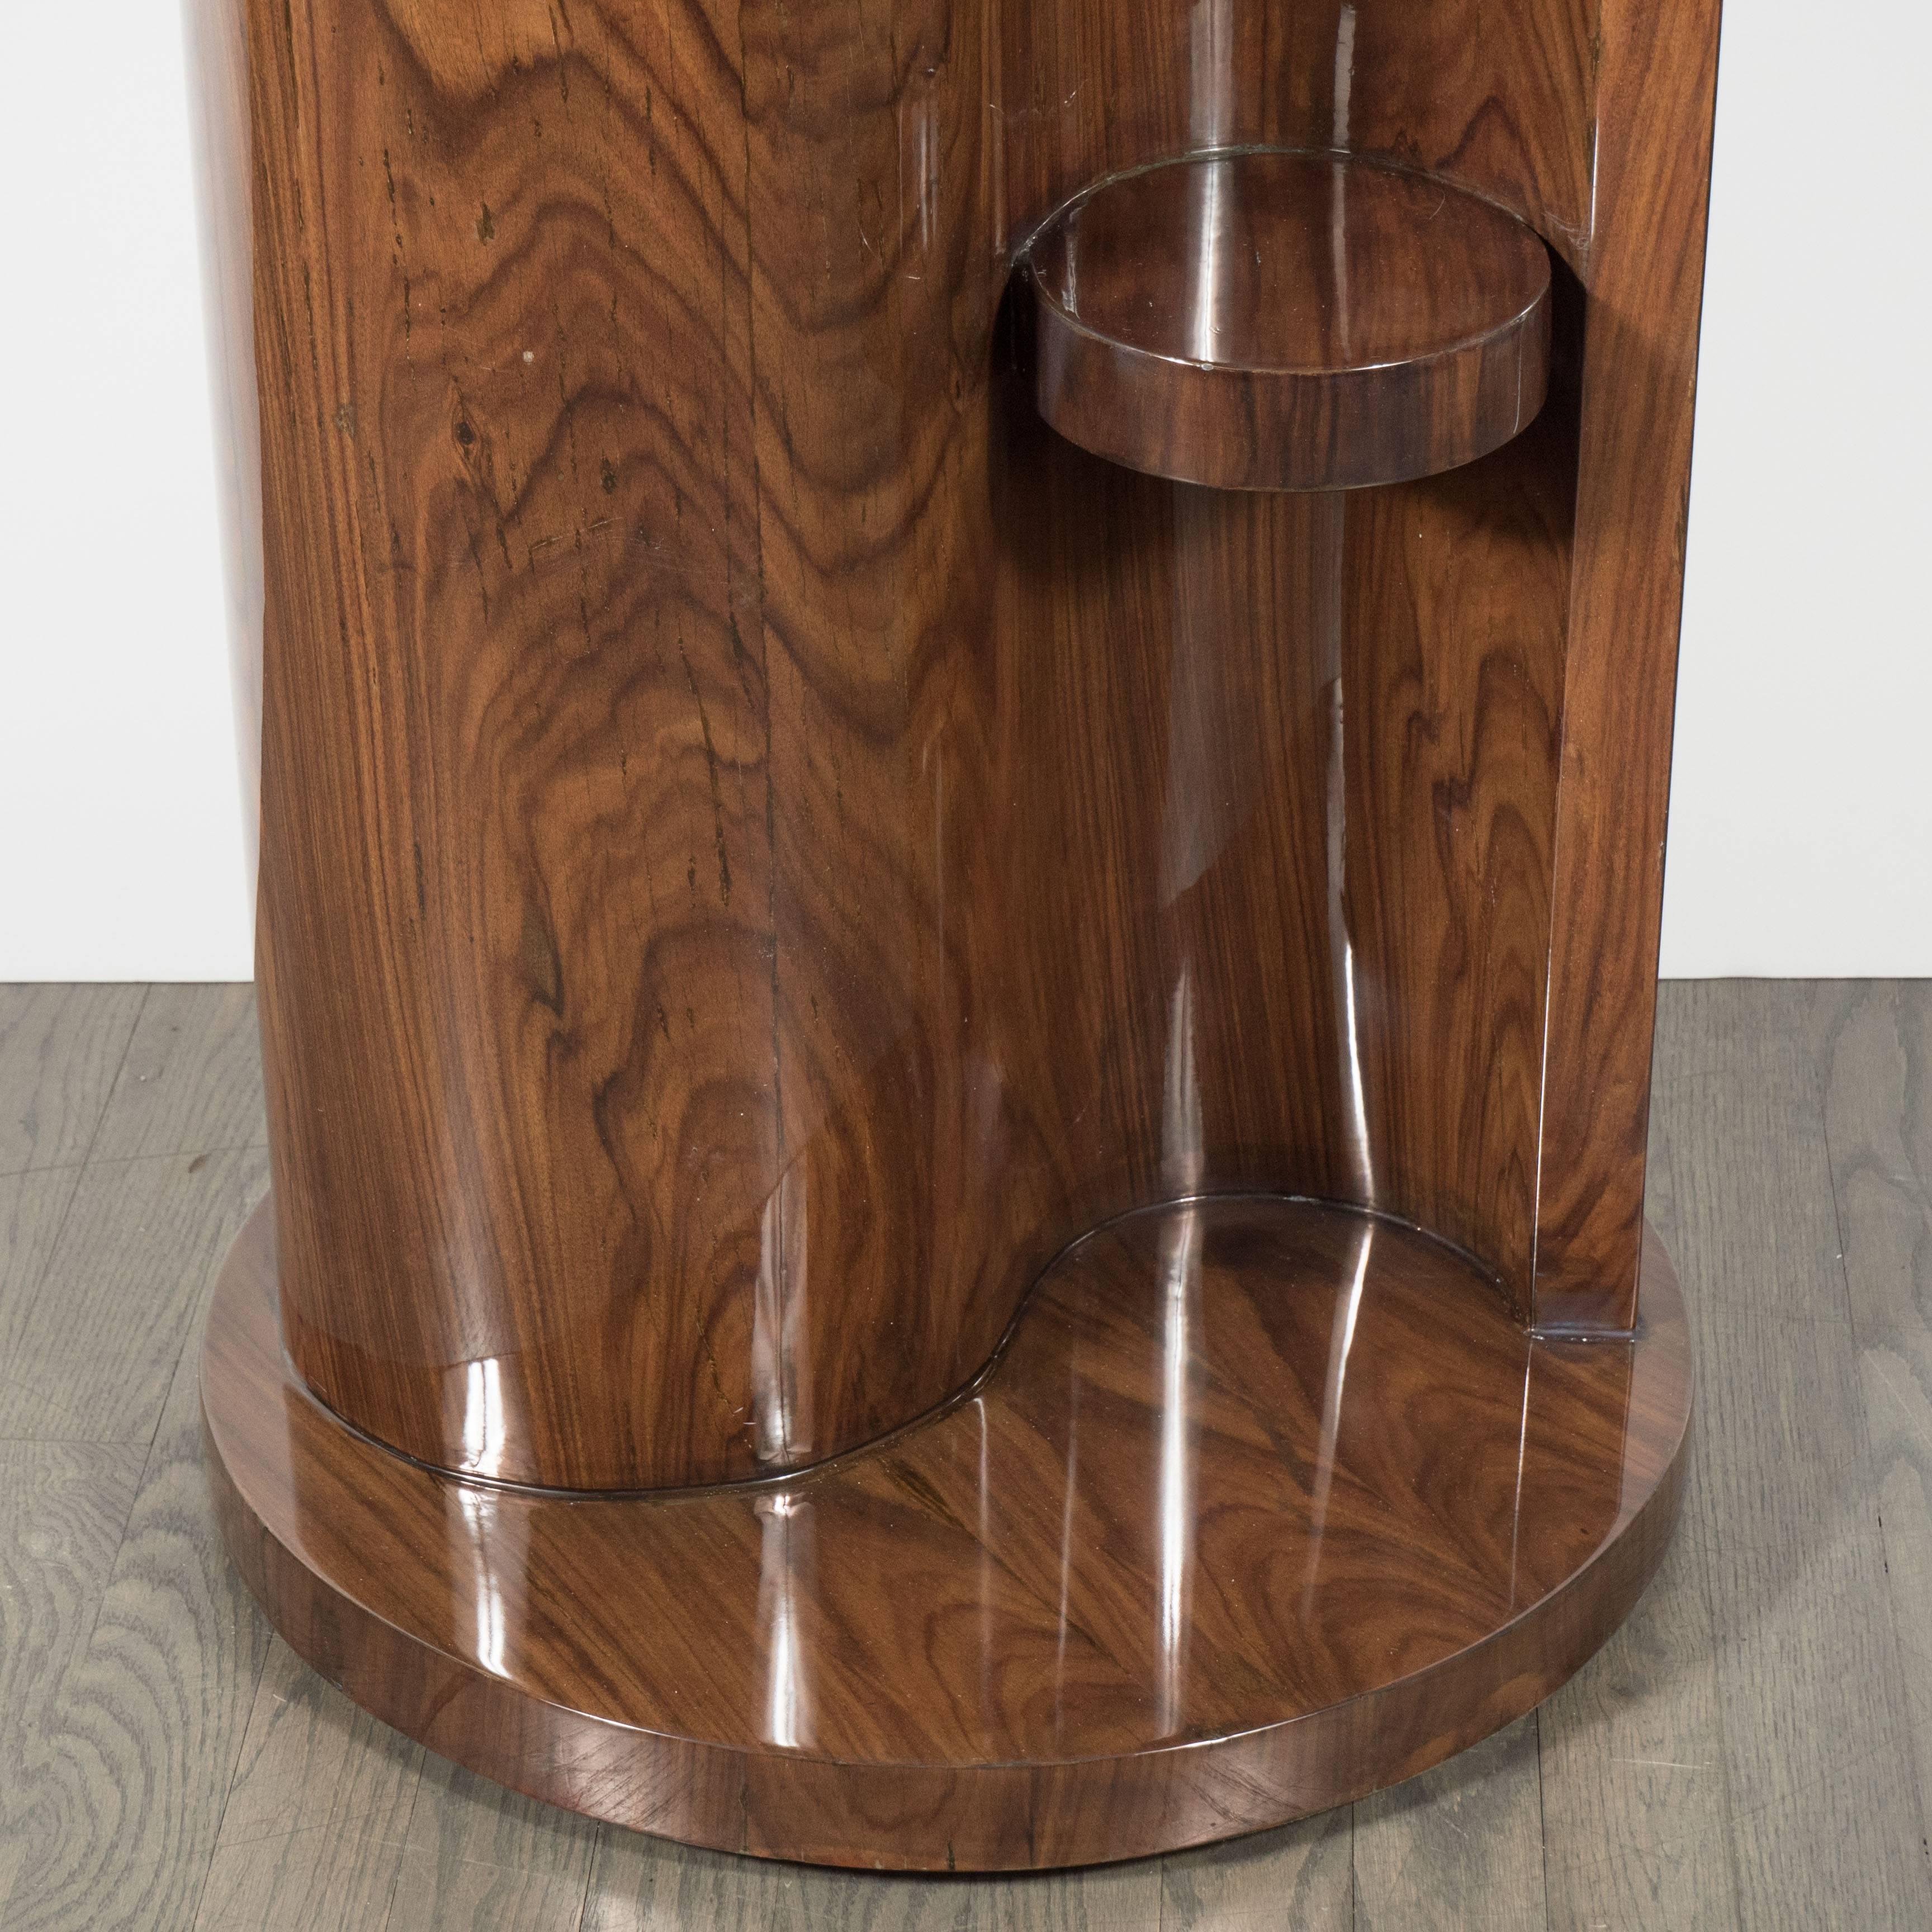 This stunning Art Deco occasional table/ pedestal in bookmatched burled walnut was realized in France circa 1935. It features a circular walnut base that supports an S-form body composed of two seamlessly adjoined streamlined forms, each with a